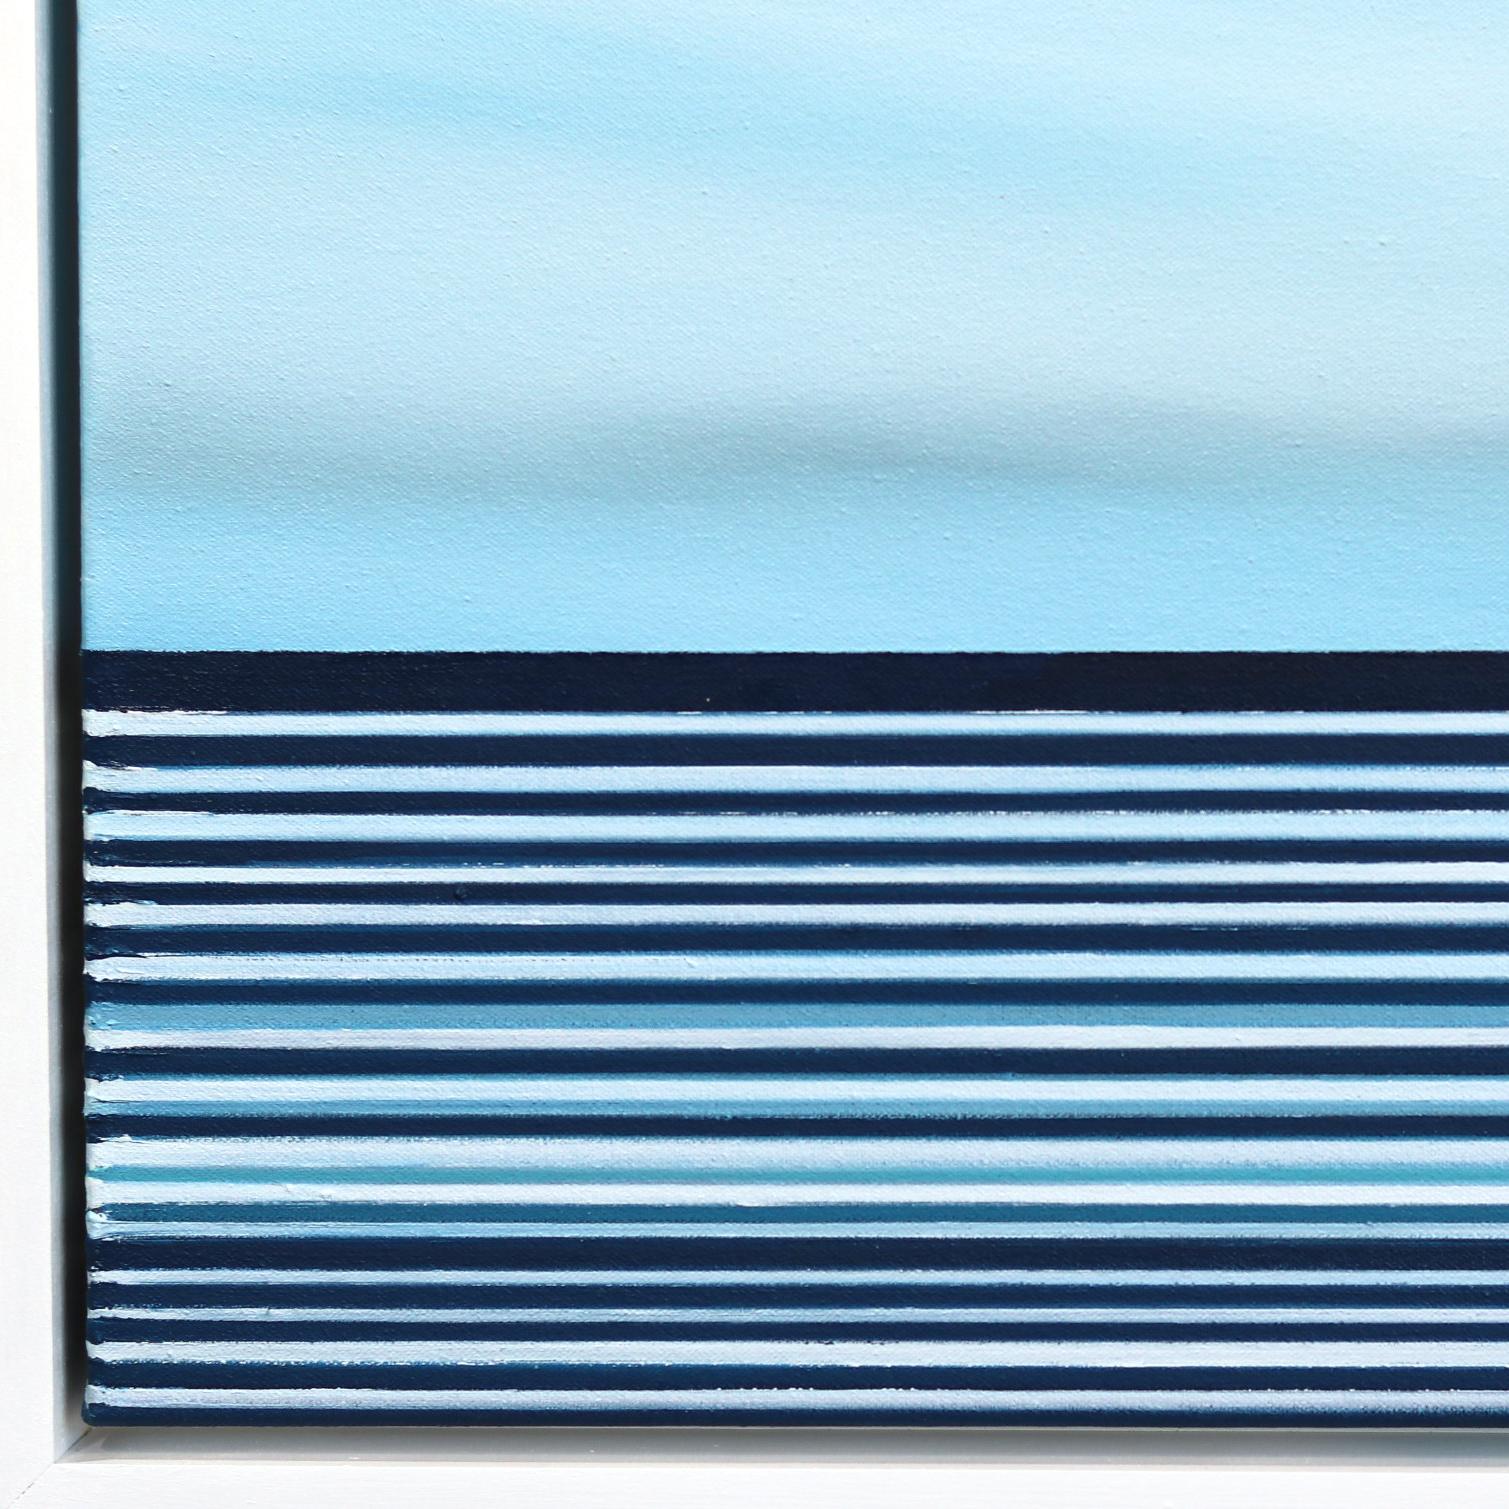 Untitled No. 756 - Framed Contemporary Minimalist Blue Artwork For Sale 1